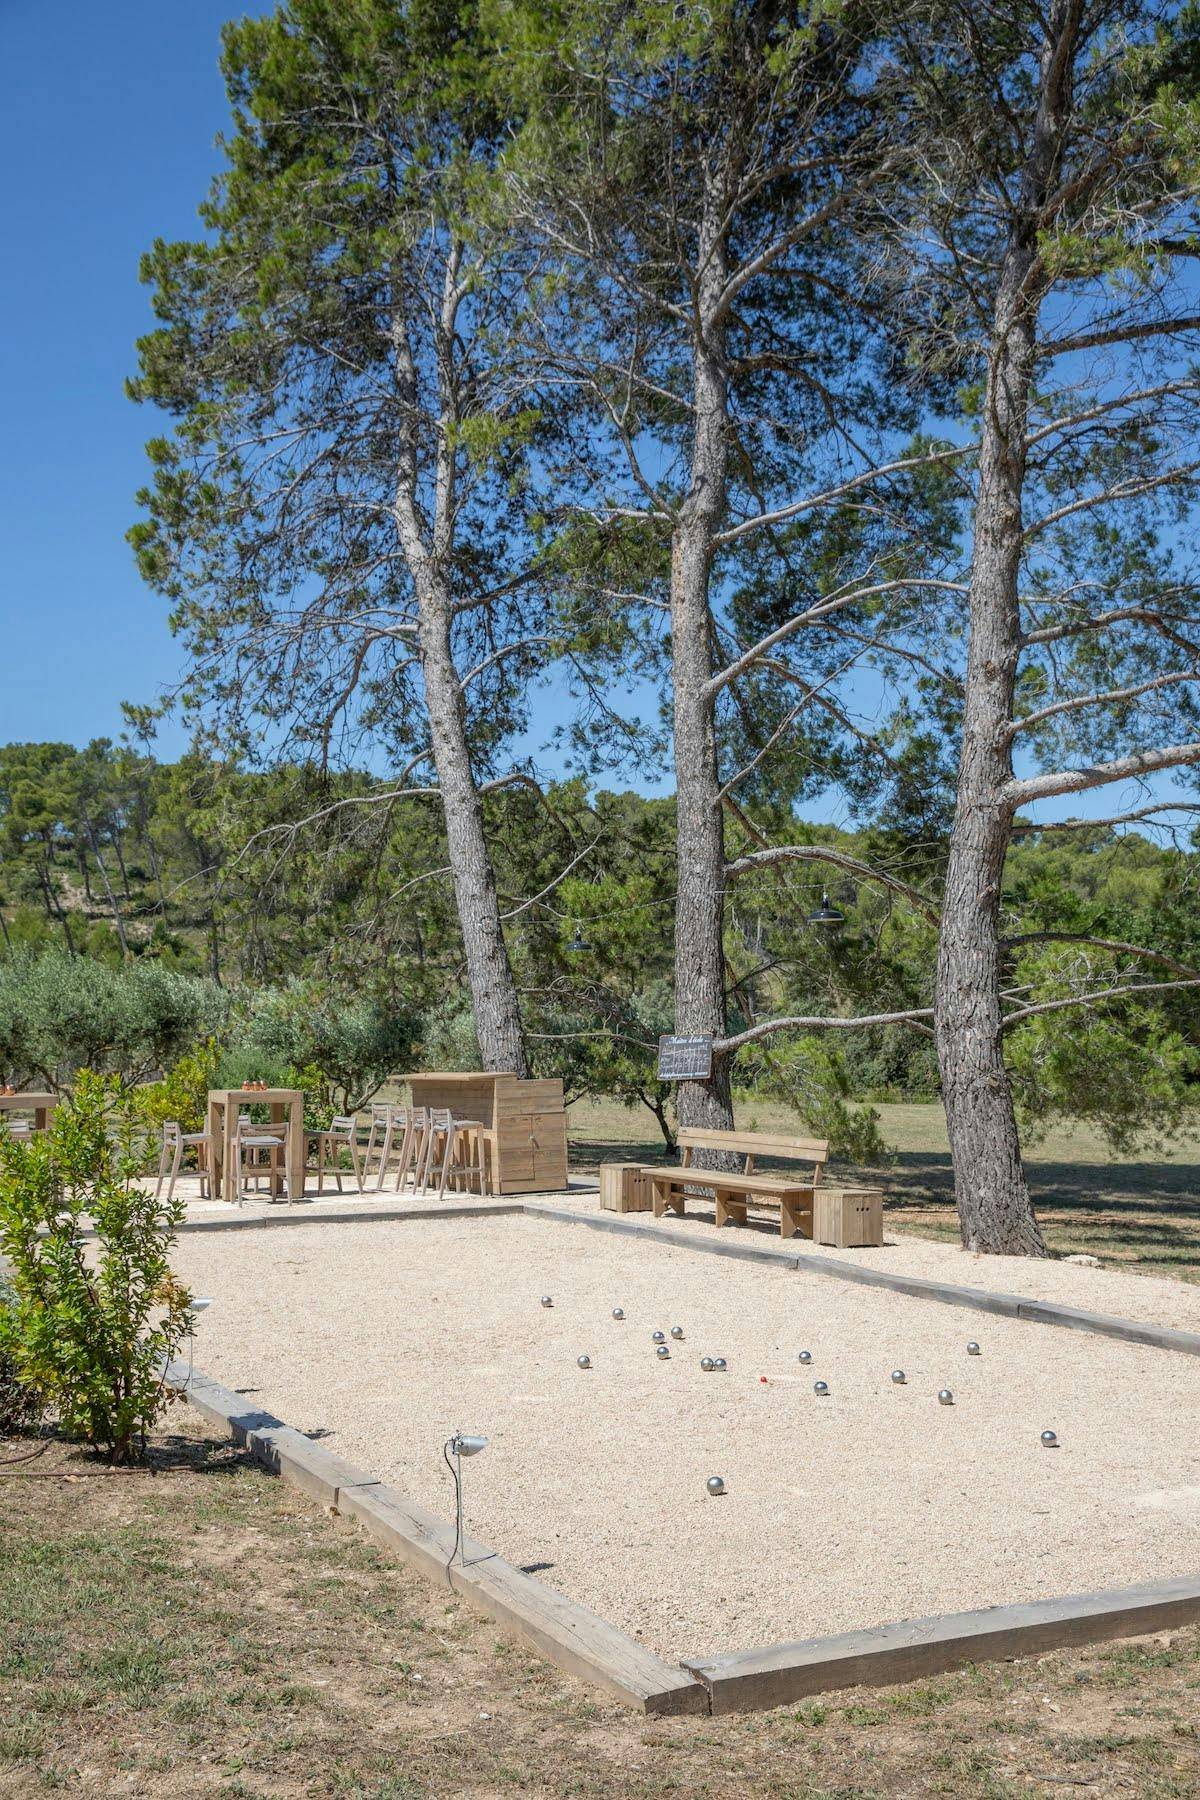 Petanque court surrounded by trees